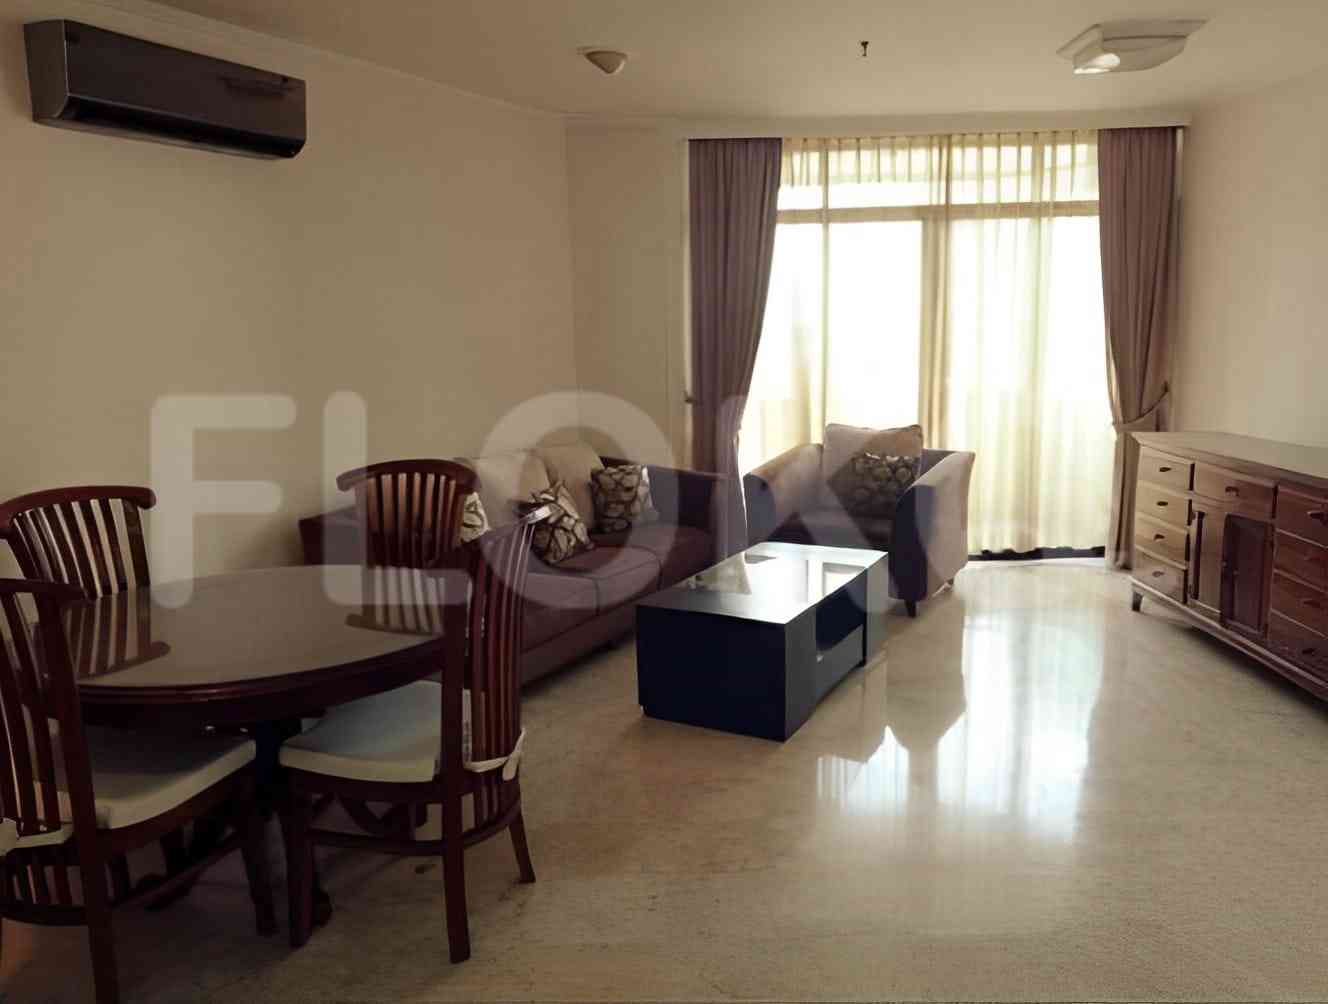 2 Bedroom on 10th Floor for Rent in Apartemen Beverly Tower - fci4ae 1